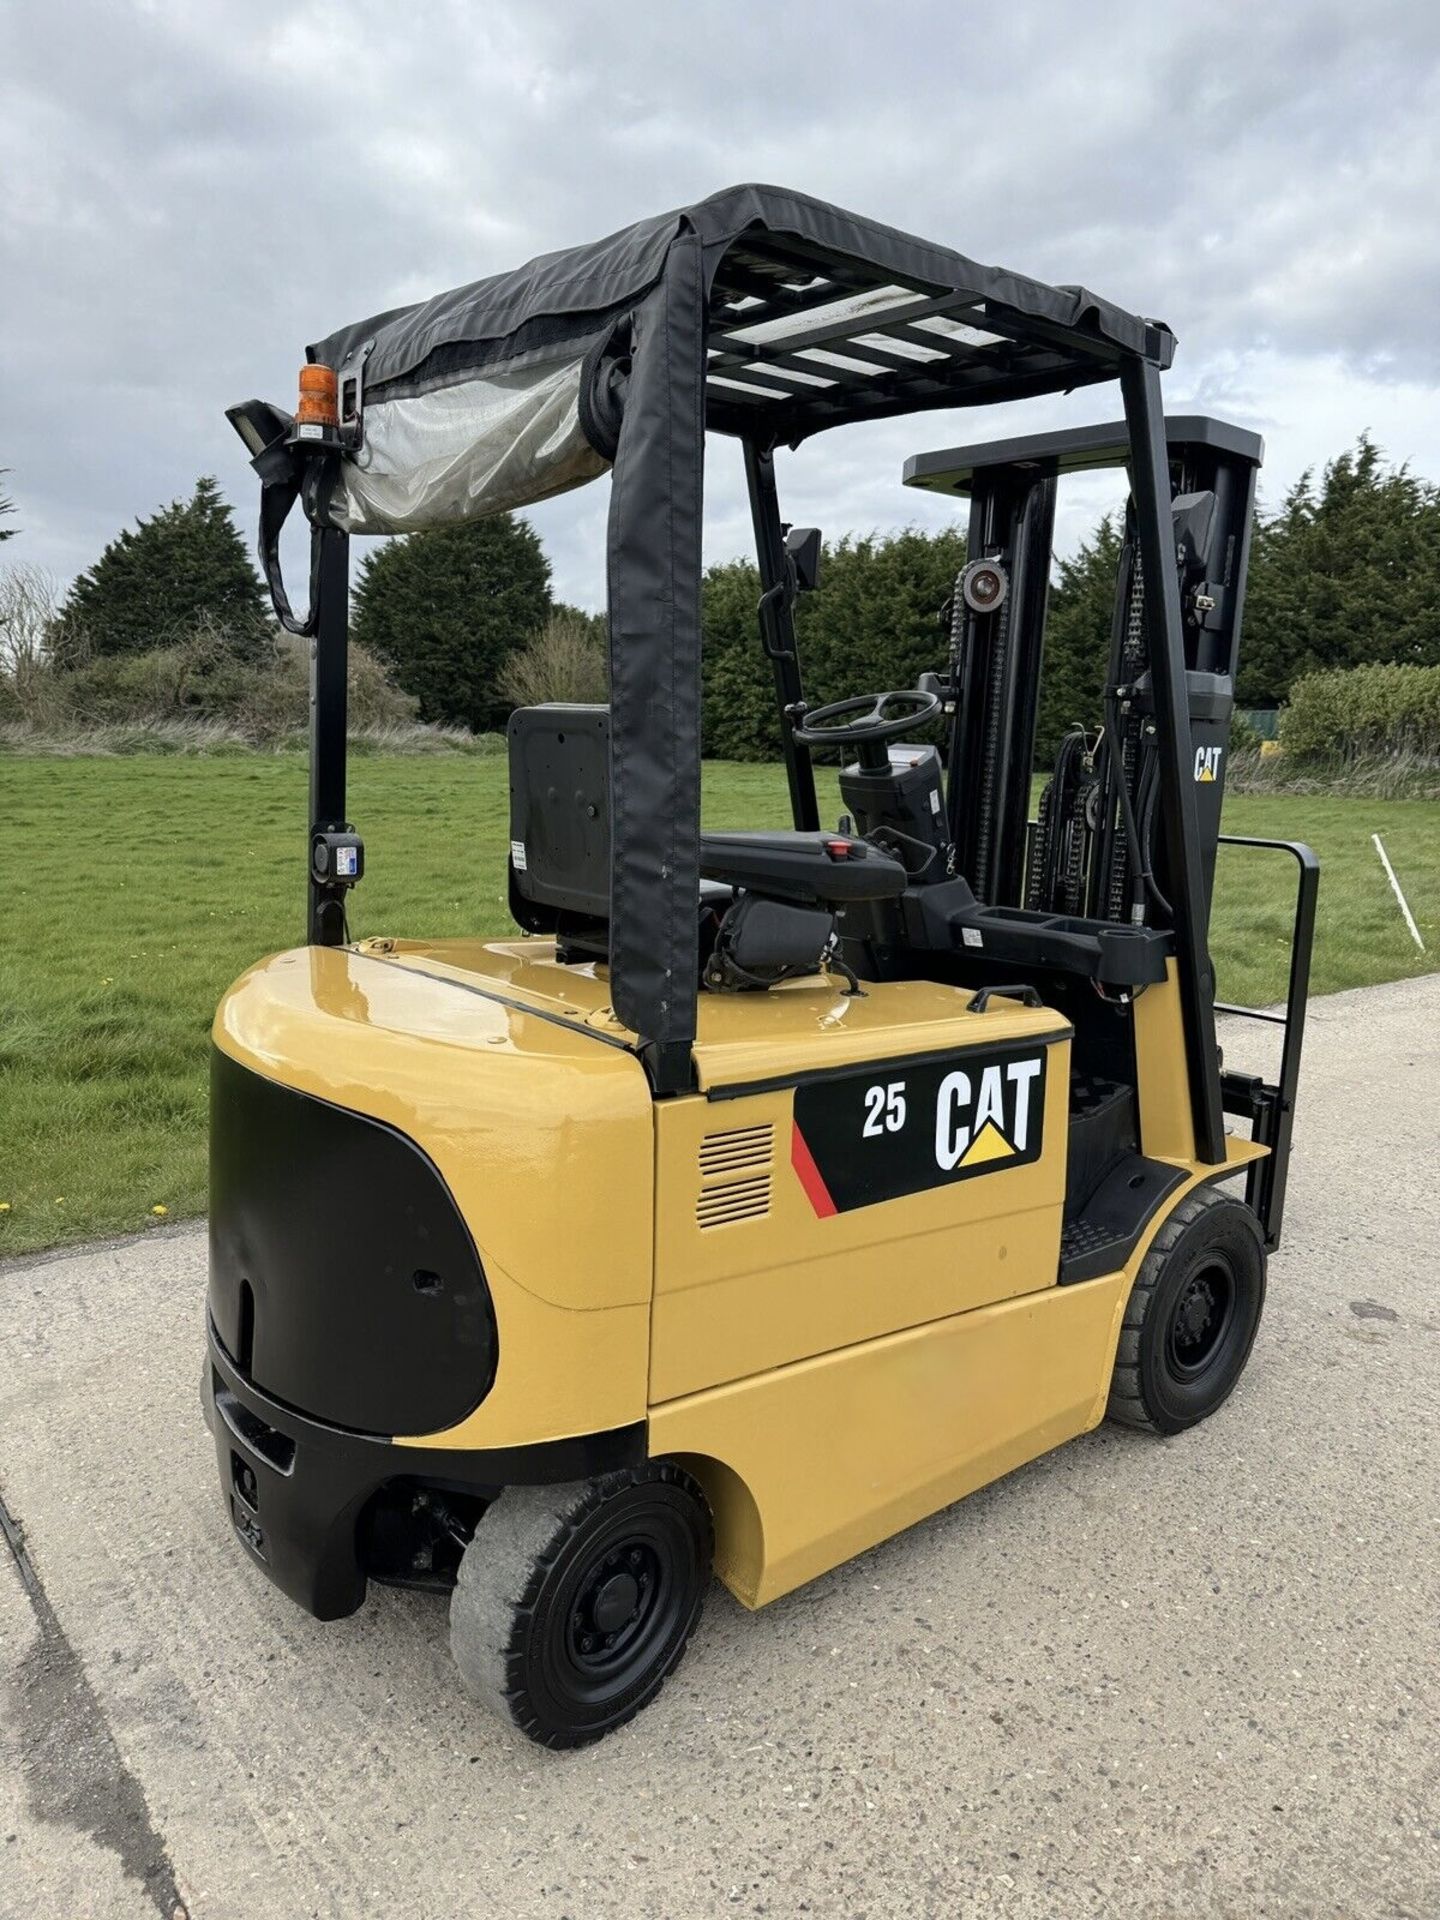 CATERPILLAR - 2.5 Tonne Electric Forklift Truck (Container Spec) - Image 4 of 7